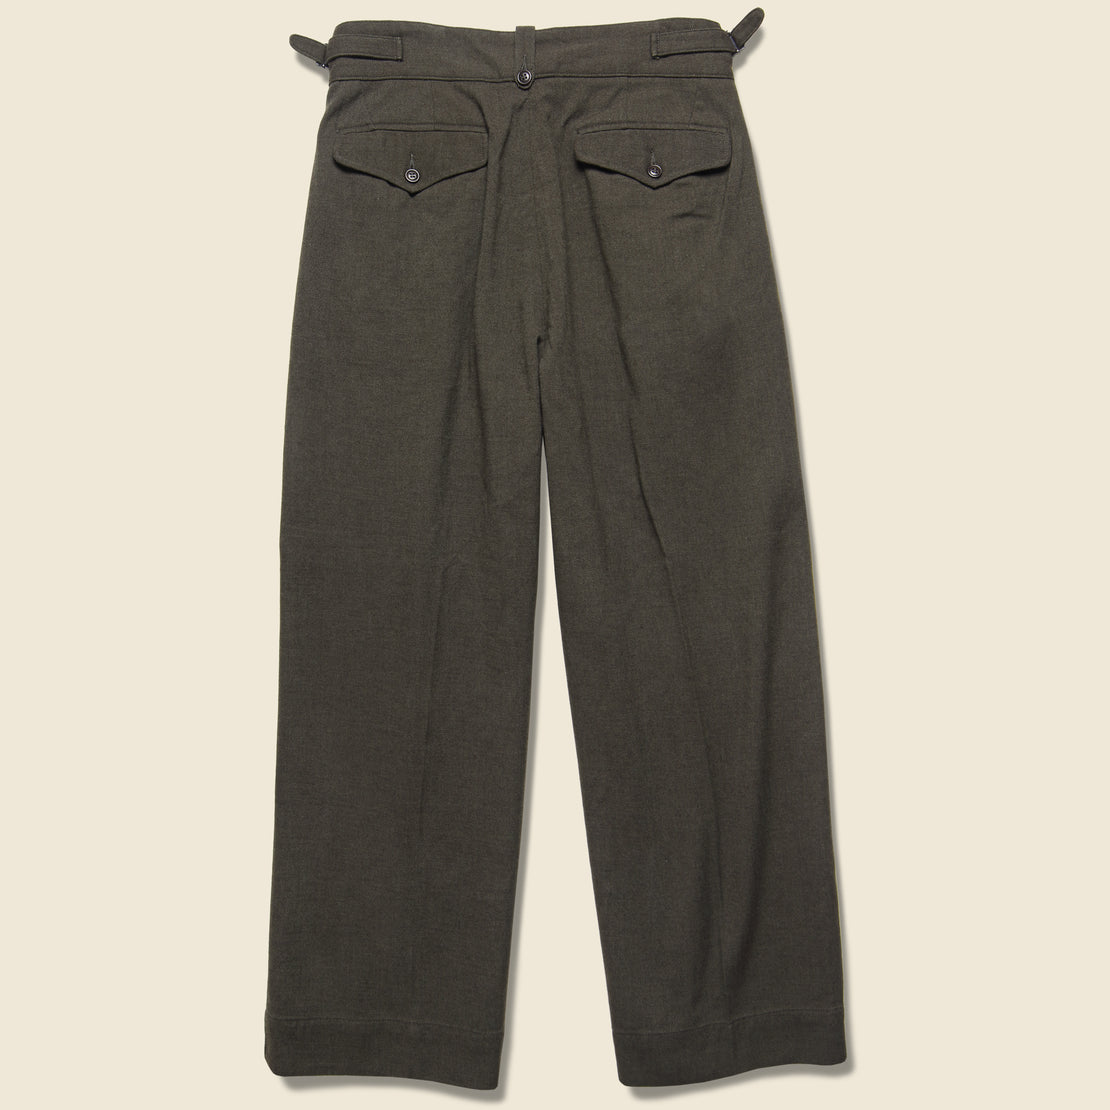 Kyle Wool Trouser - Sedona Moss - RRL - STAG Provisions - W - Pants - Twill